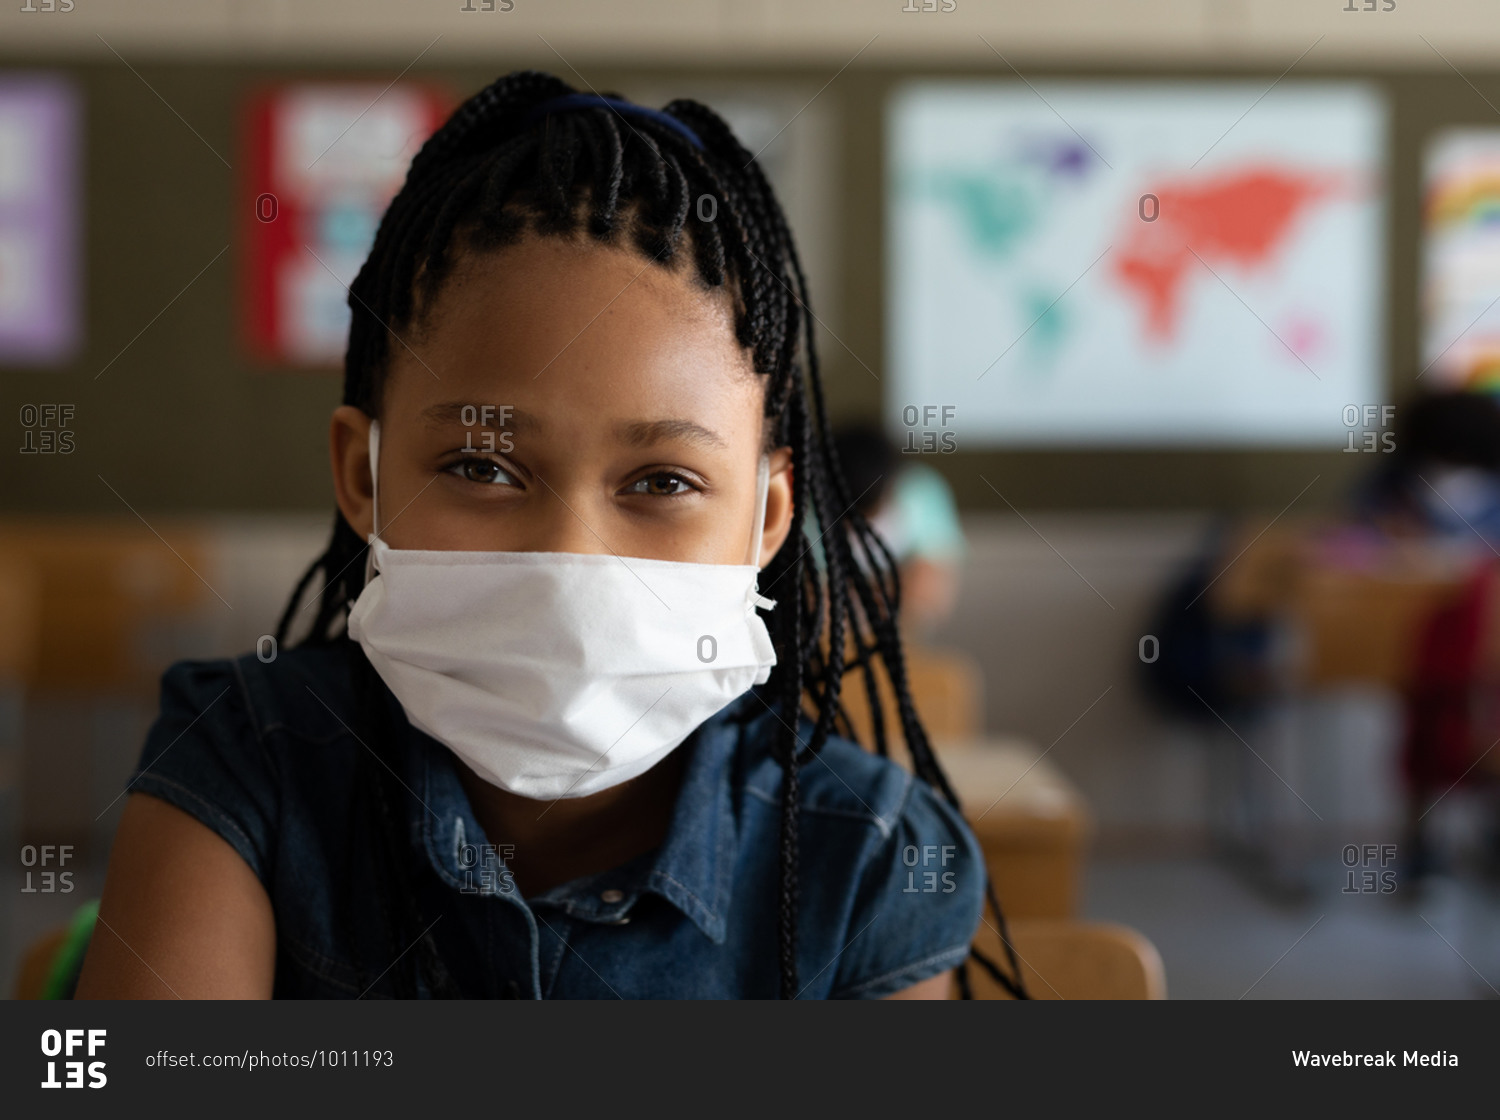 Portrait of a mixed race girl sitting at desks wearing face mask in classroom, looking at camera. Primary education social distancing health safety during Covid19 Coronavirus pandemic.